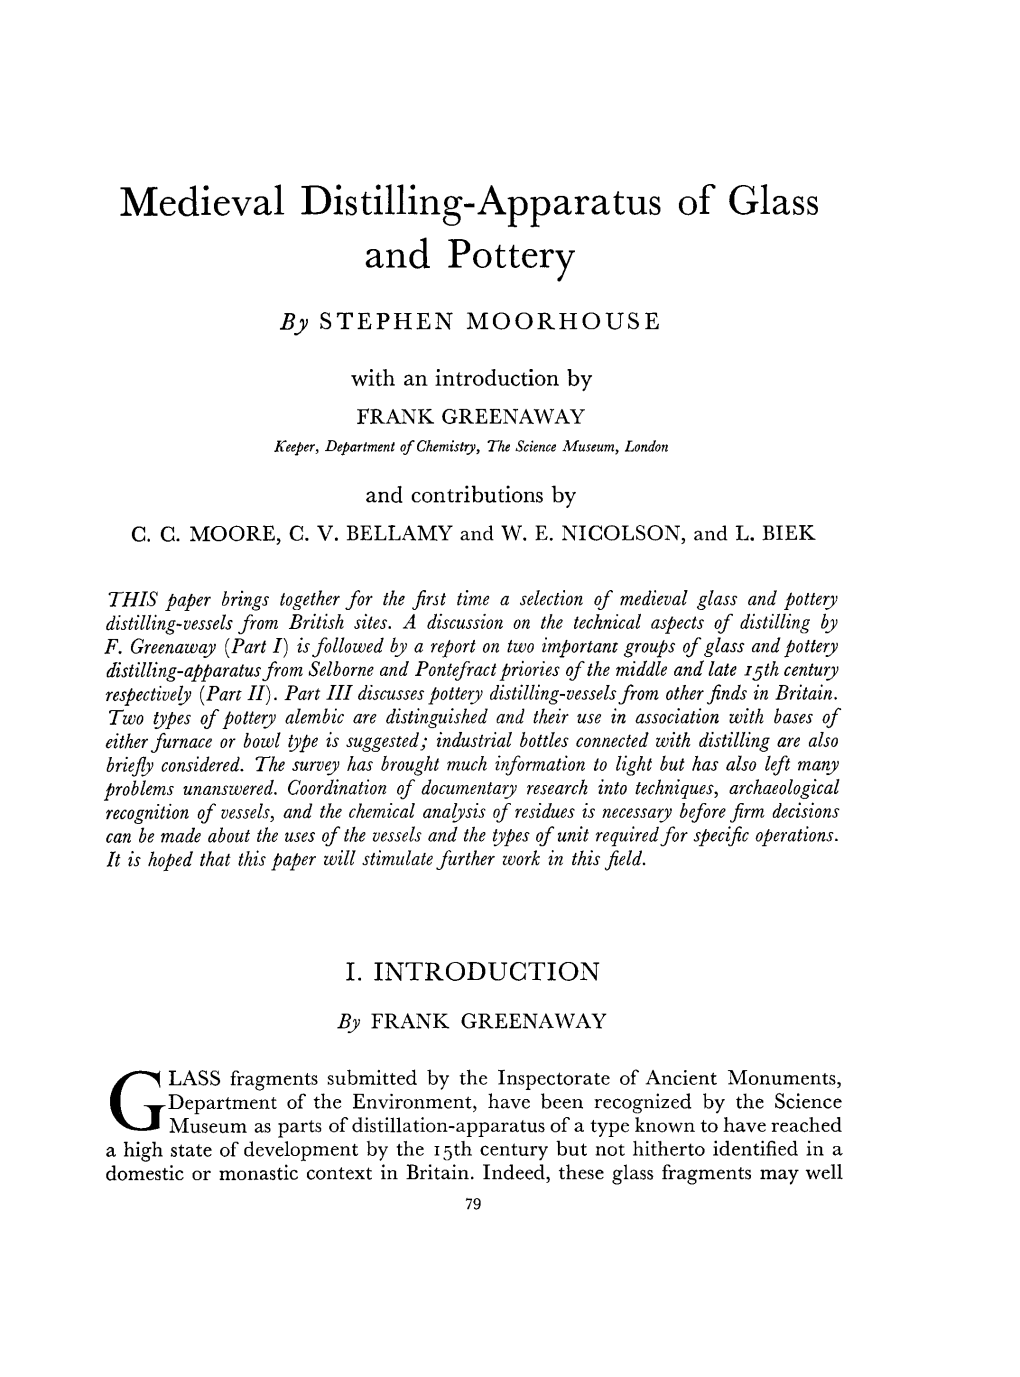 Medieval Distilling-Apparatus of Glass and Pottery